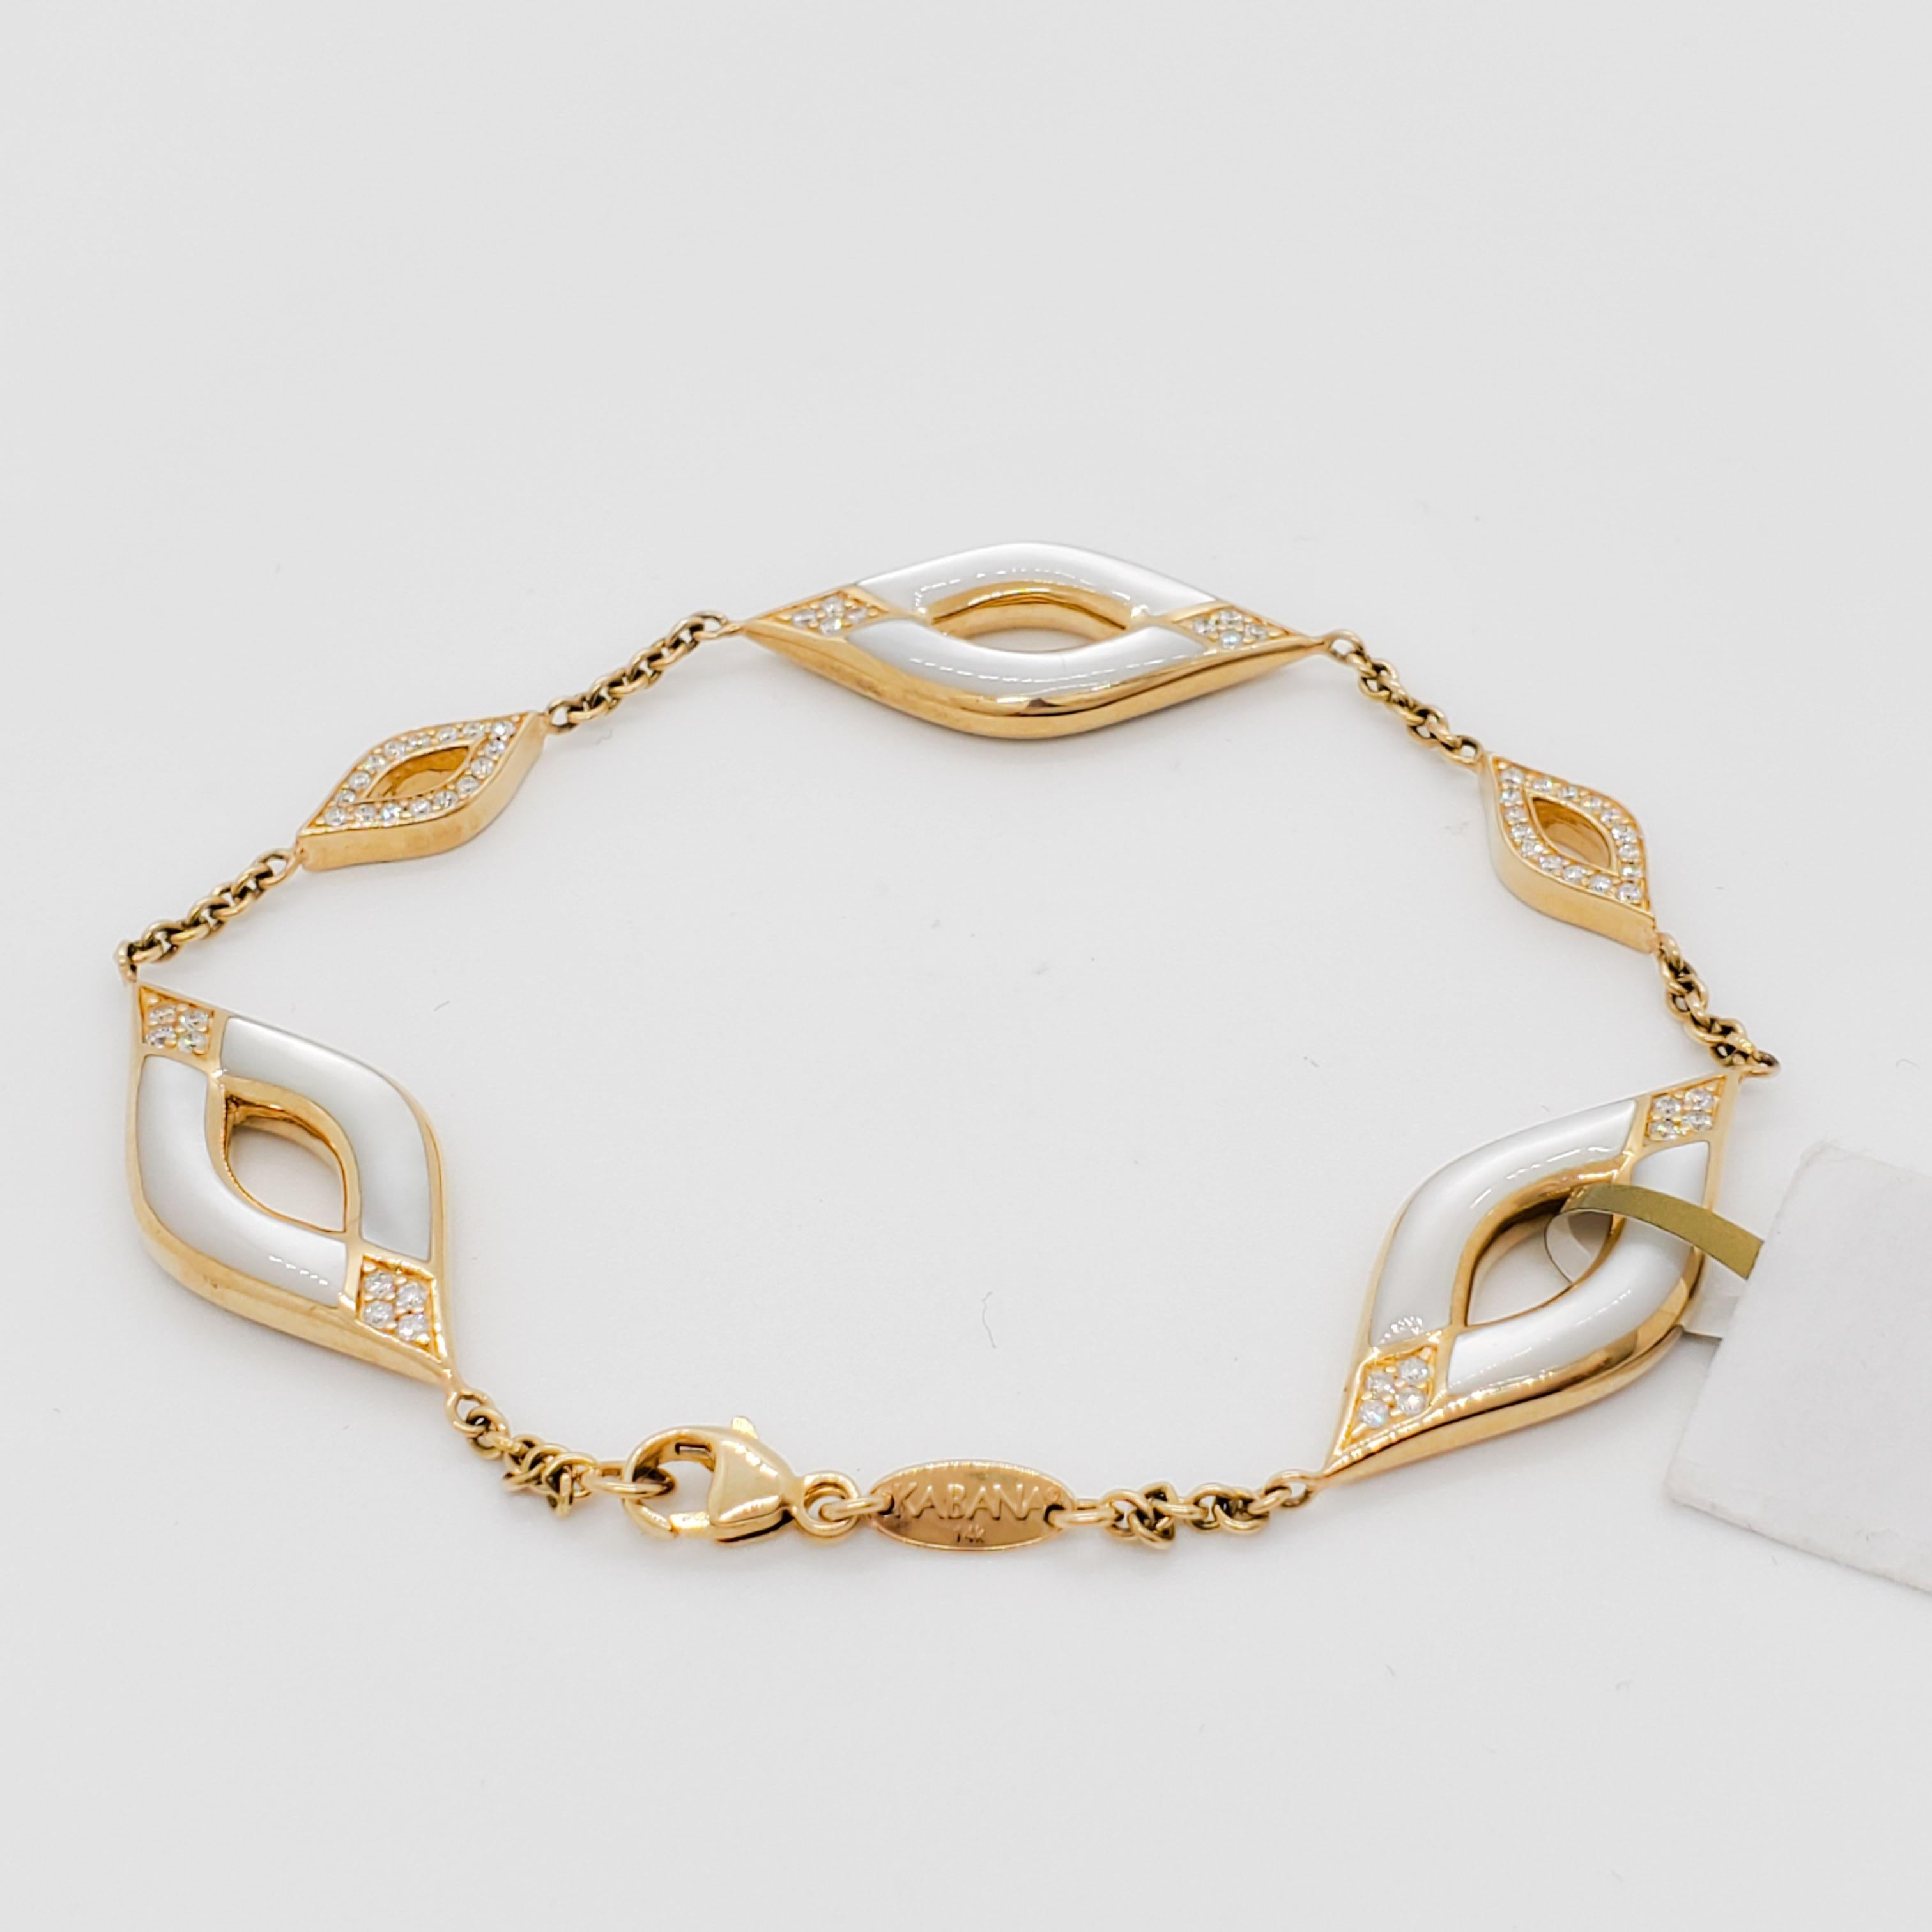 Gorgeous Kabana bracelet with white mother of pearl and 0.50 ct. good quality, white, and bright diamond rounds.  Handmade in 14k yellow gold in the USA.  This item retails for much higher.  We have bought a whole deal of Kabana and have several